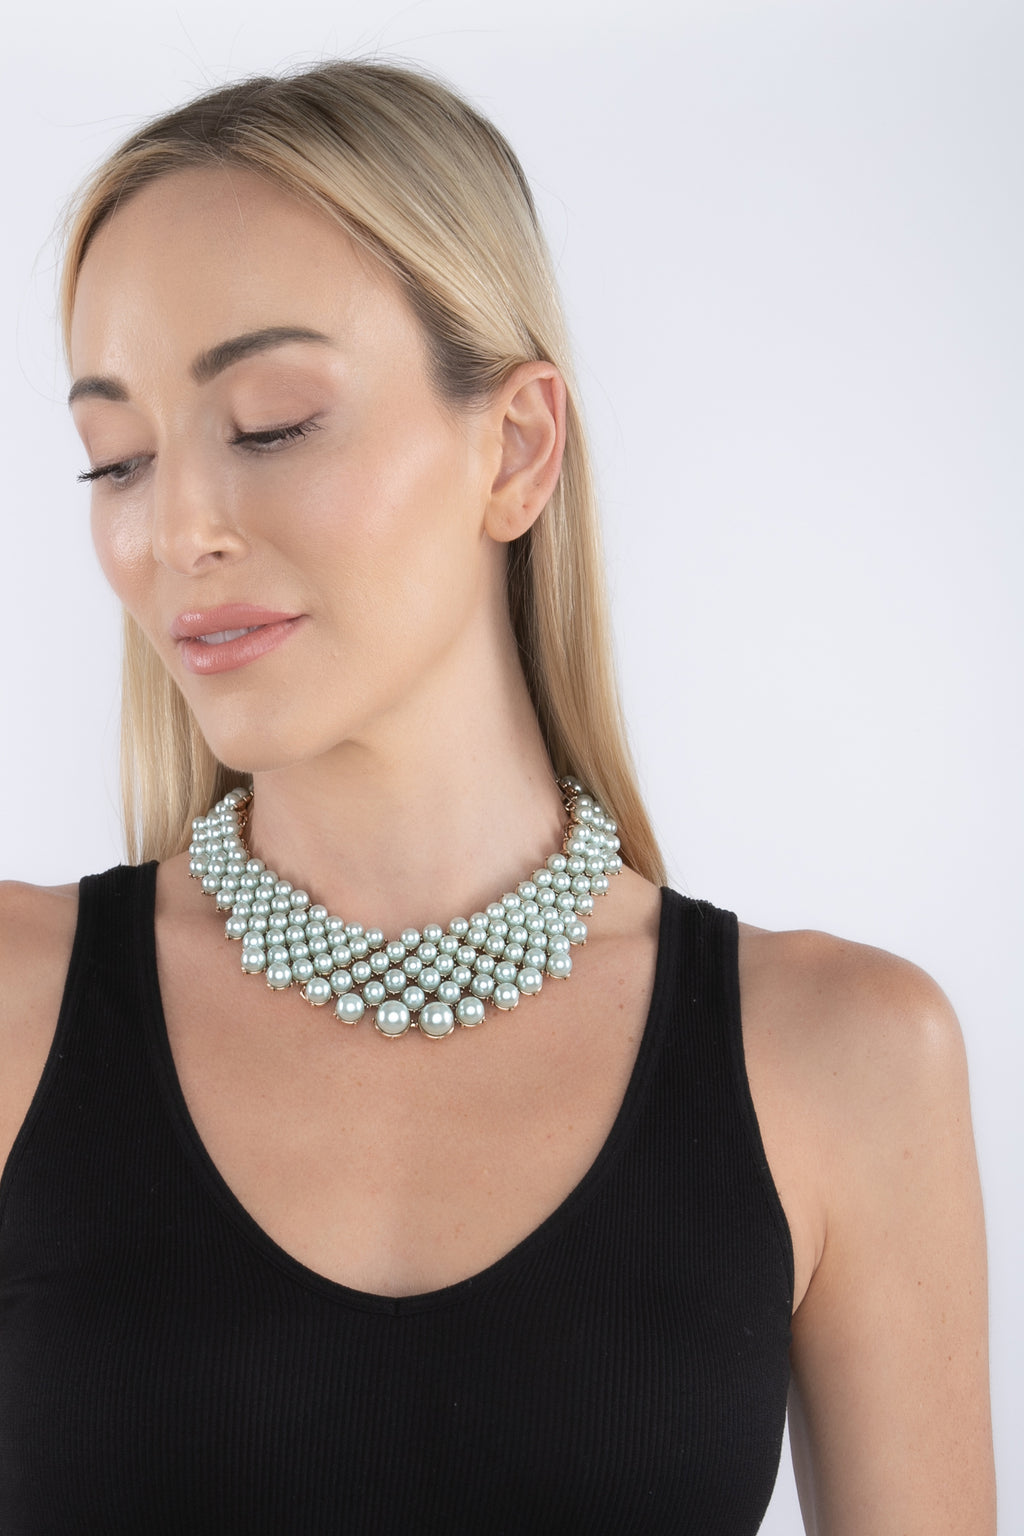 Teal alloy statement necklace studded with glass crystals.